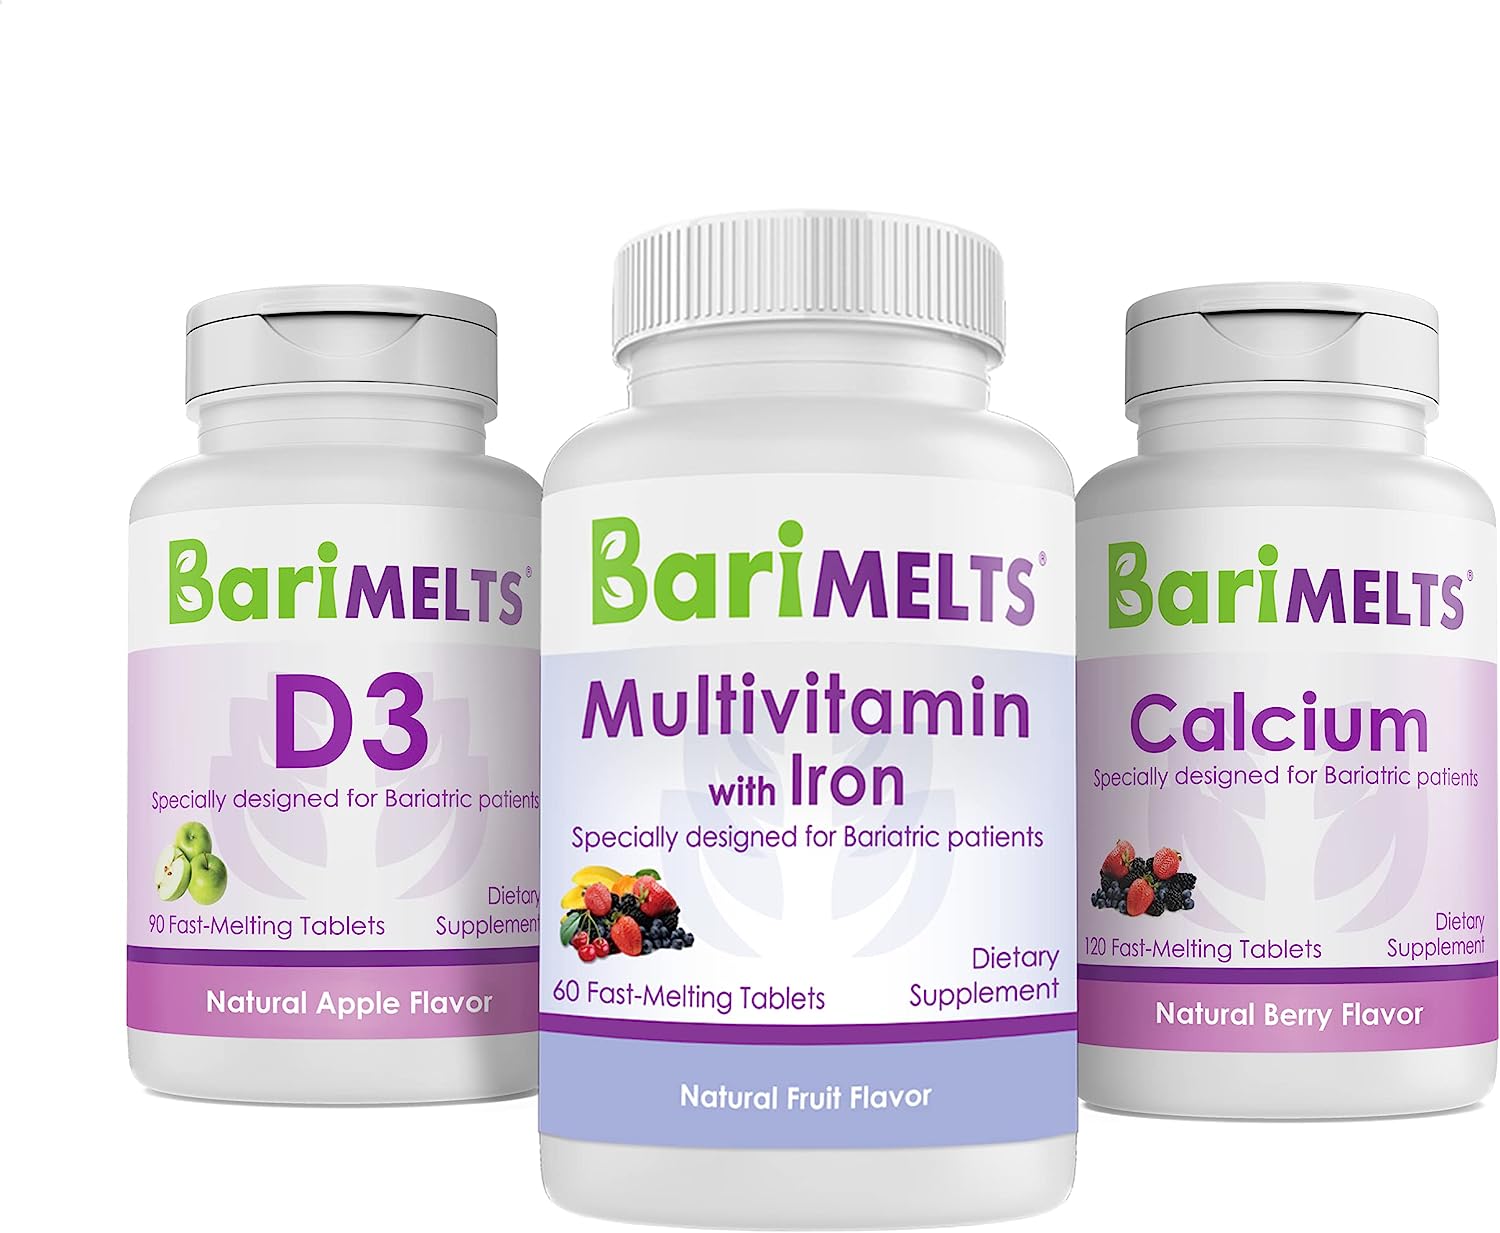 7 Best Bariatric Vitamins to Help You Reach Your Goals: High-Powered Nutrients for Maximum Results